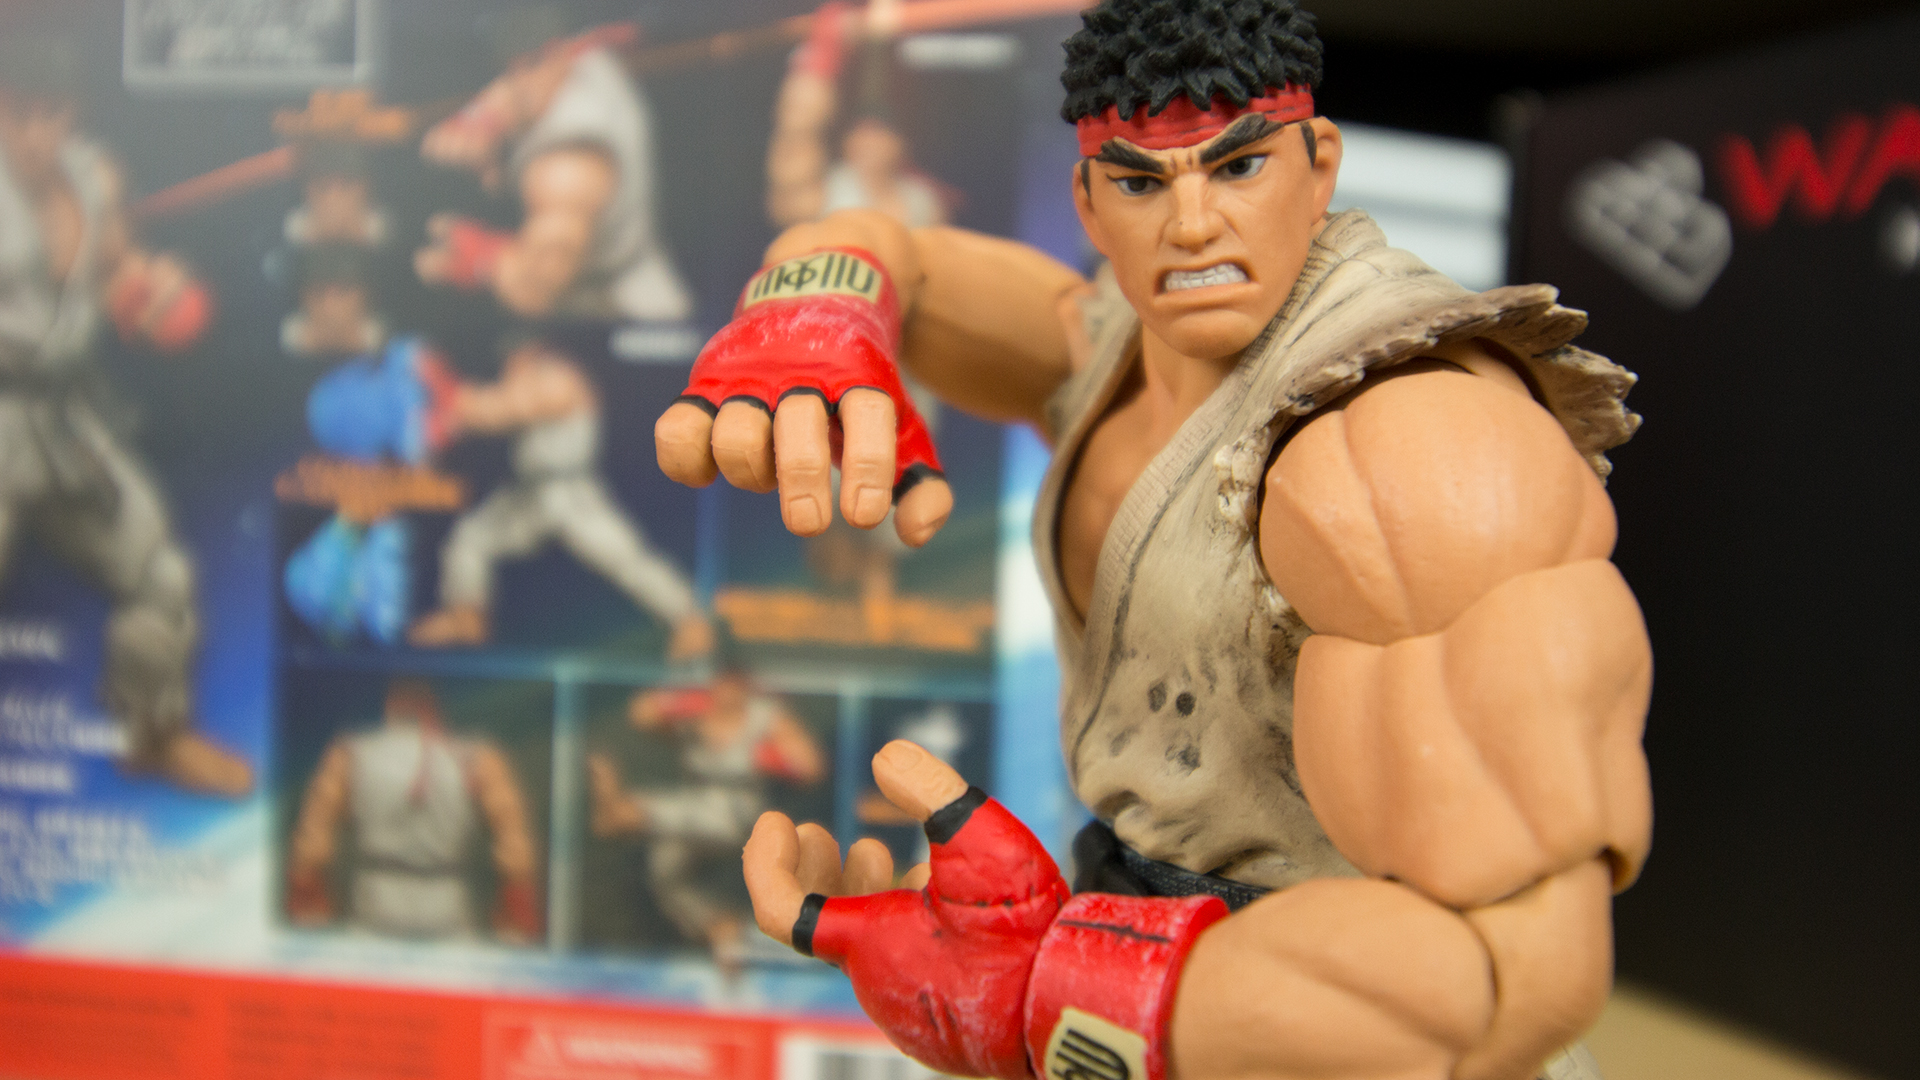 Storm Collectibles’ Ryu And Scorpion Figures Are The Best Around